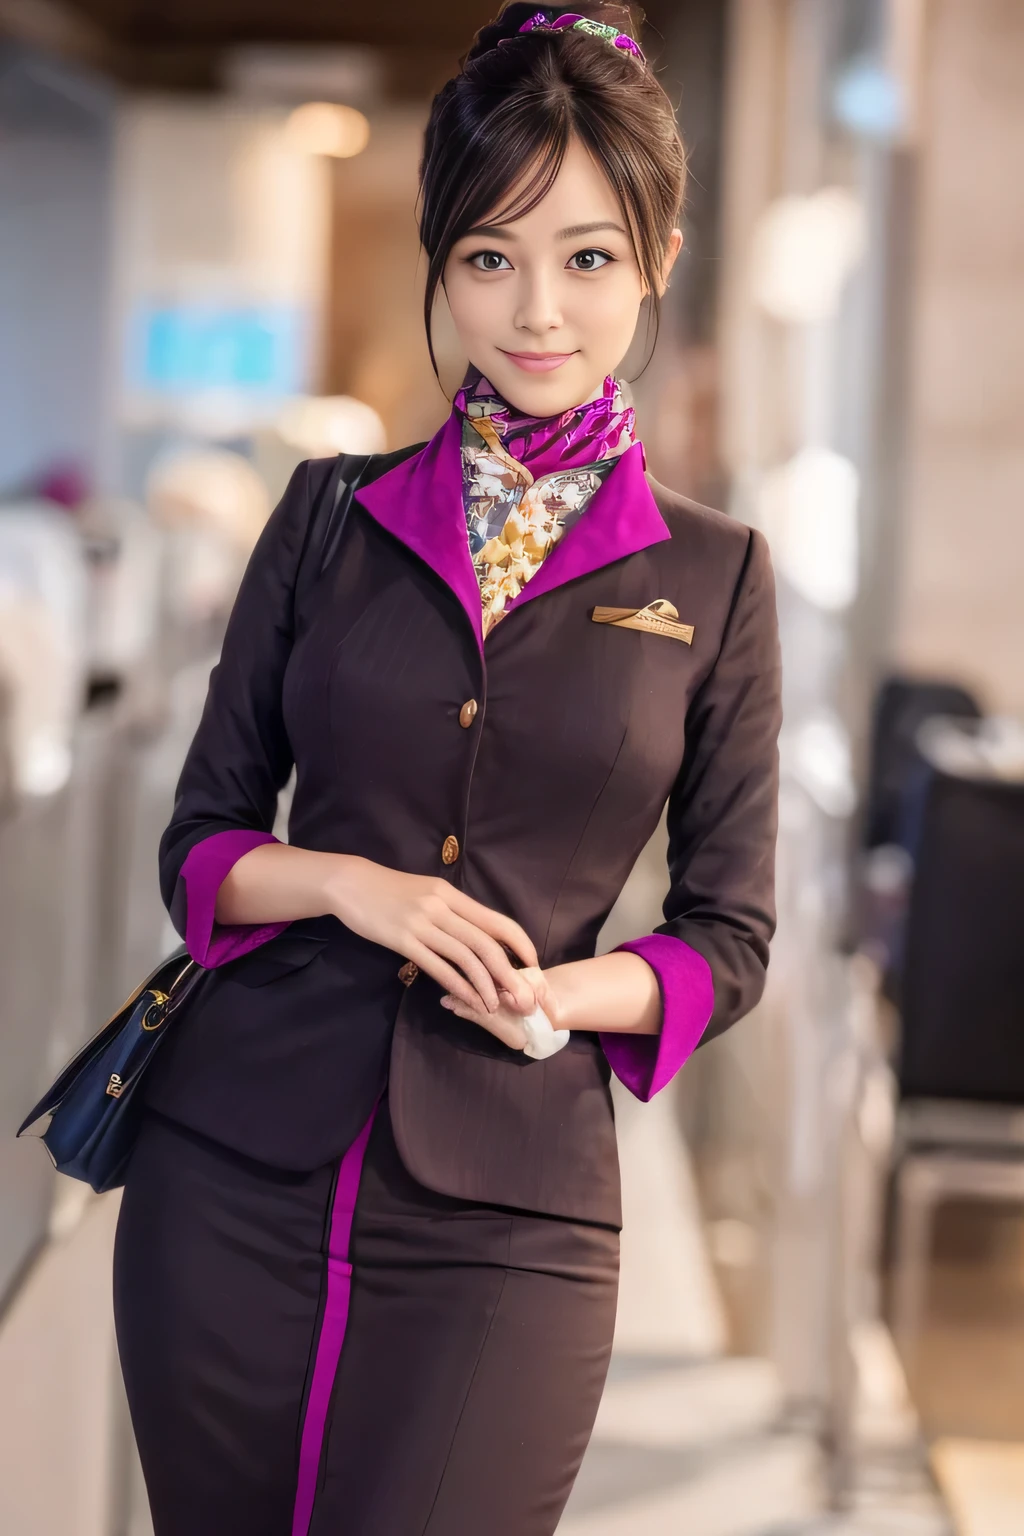 (masterpiece:1.2、highest quality:1.2)、32K HDR、High resolution、(alone、1 girl、Slim figure)、（A realistic reproduction of the ETIHAD Airways Cabincrew Uniform）、 (On board, Professional Lighting)、A proper woman, Beautiful Face,、（Long sleeve ETIHAD Airways Cabincrew Uniform）、（ETIHAD Airways Cabincrew Uniform skirt with purple stripe on the front）、（scarf on chest）、Big Breasts、（Long Hair Up、Hair Bun）、Dark brown hair、Long Shot、（（Great hands：2.0））、（（Harmonious body proportions：1.5））、（（Normal limbs：2.0））、（（Normal finger：2.0））、（（Delicate eyes：2.0））、（（Normal eyes：2.0））)、Beautiful standing posture、smile、Hands folded underneath